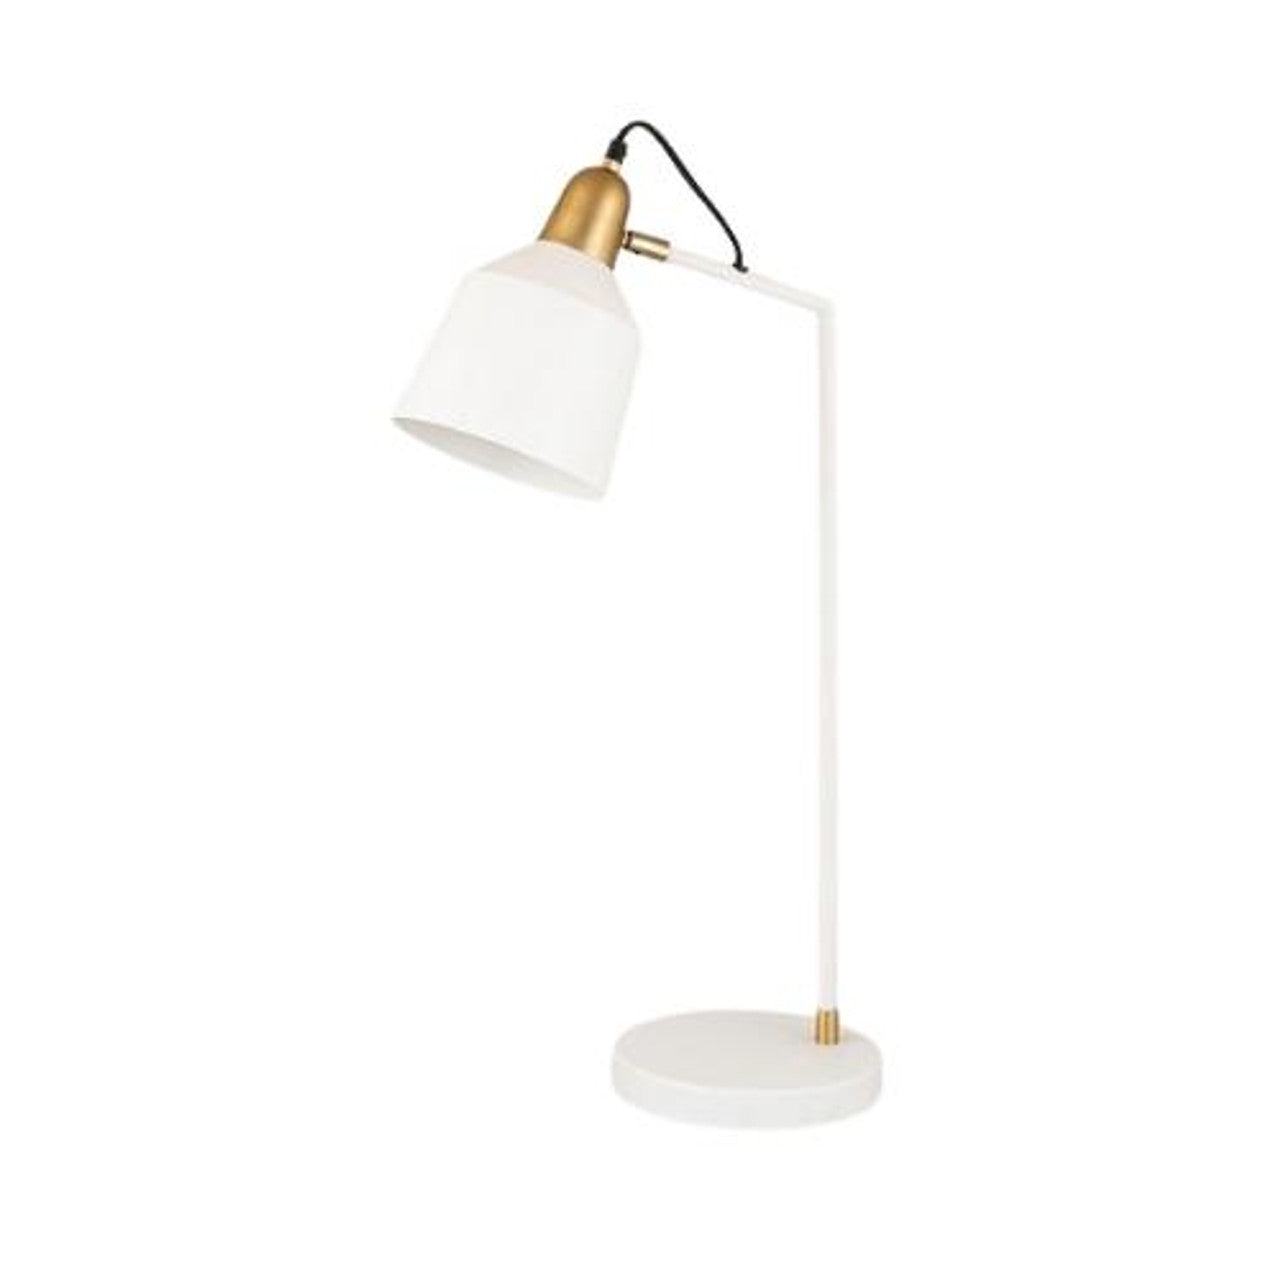 Butterworth White & Gold Table Lamp - Future Light - LED Lights South Africa